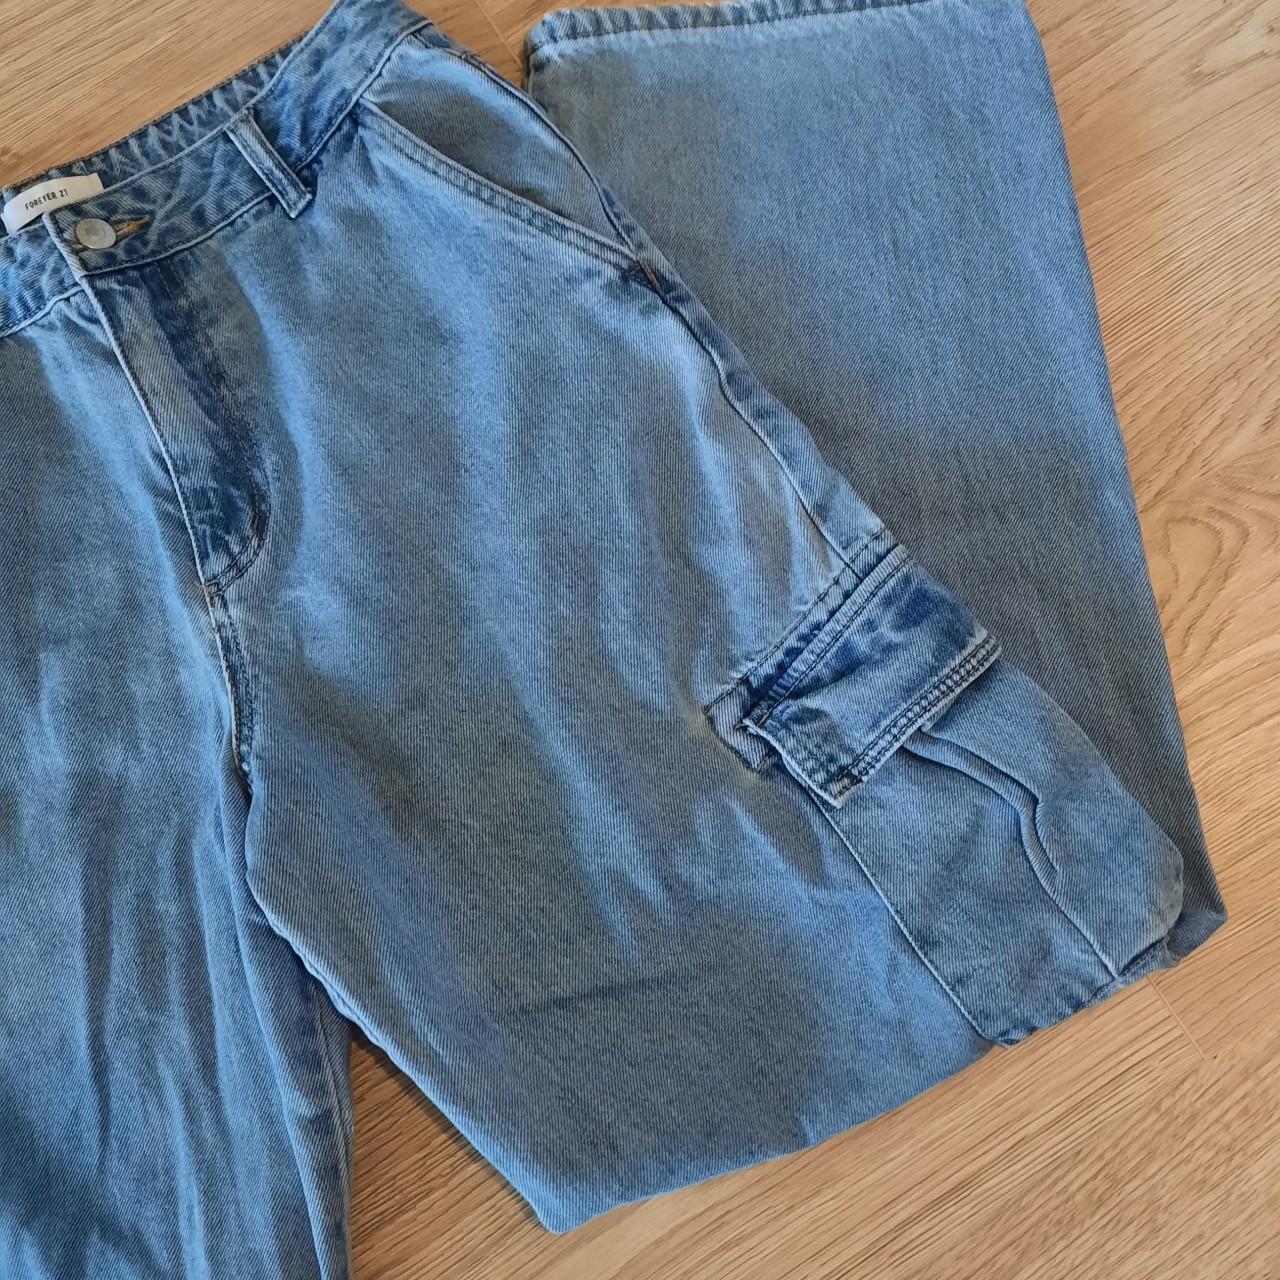 Forever 21 Women's Blue and Navy Jeans | Depop